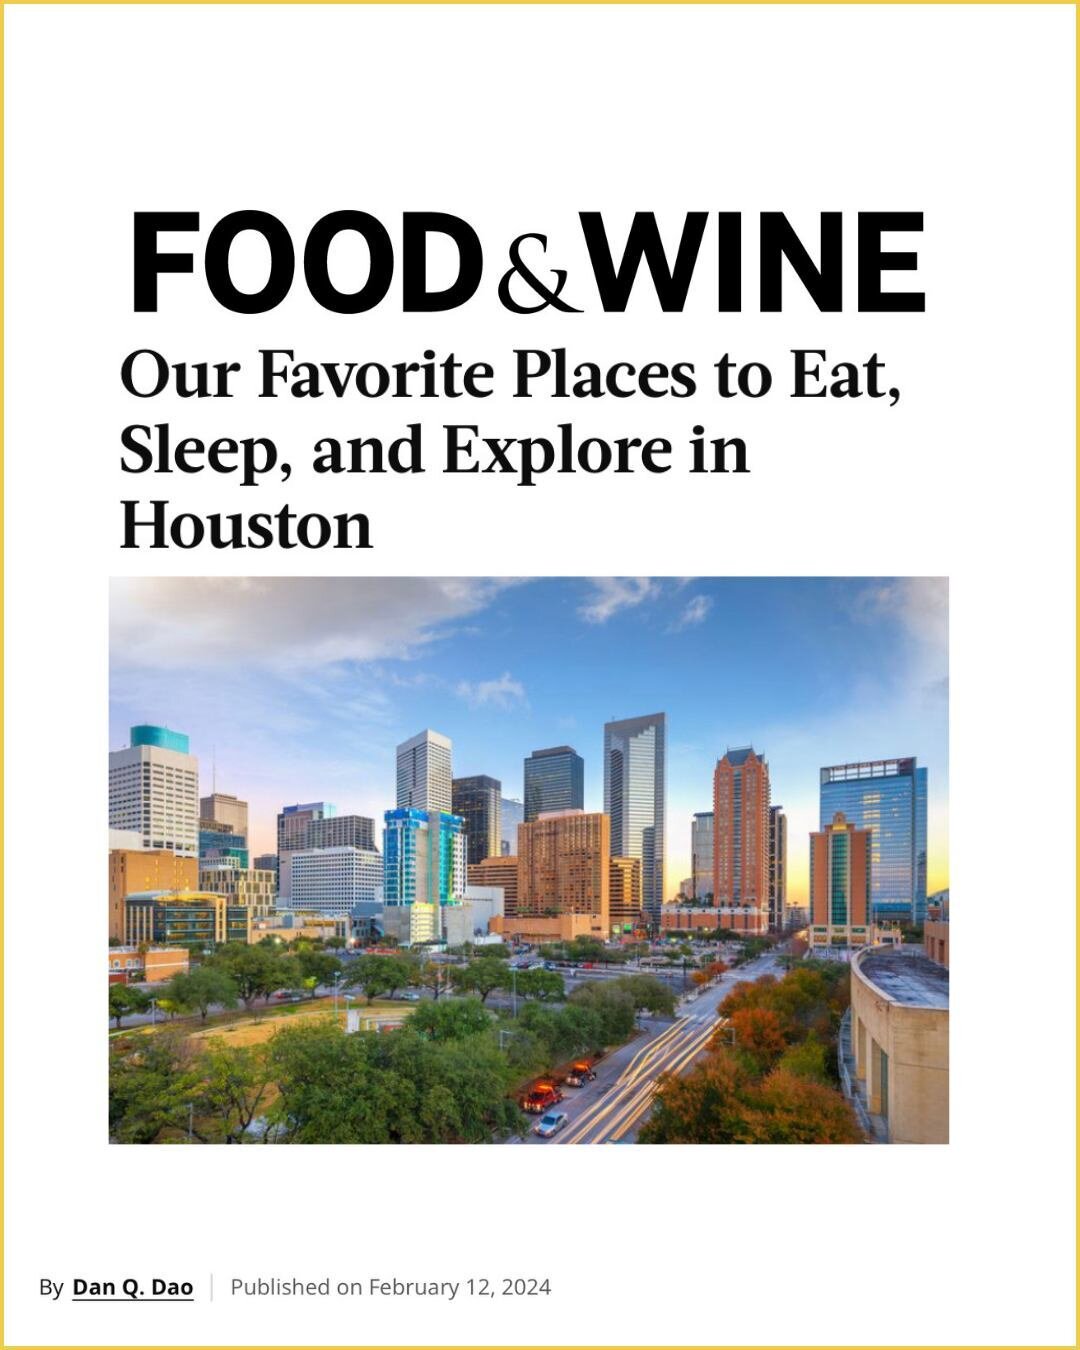 @foodandwine&rsquo;s &ldquo;Our Favorite Places to Eat, Sleep, and Explore in Houston&rdquo; feature is packed to the brim with some of our favorite businesses! @danqdao celebrates the arts, the culture, the food, and everything that makes our city s